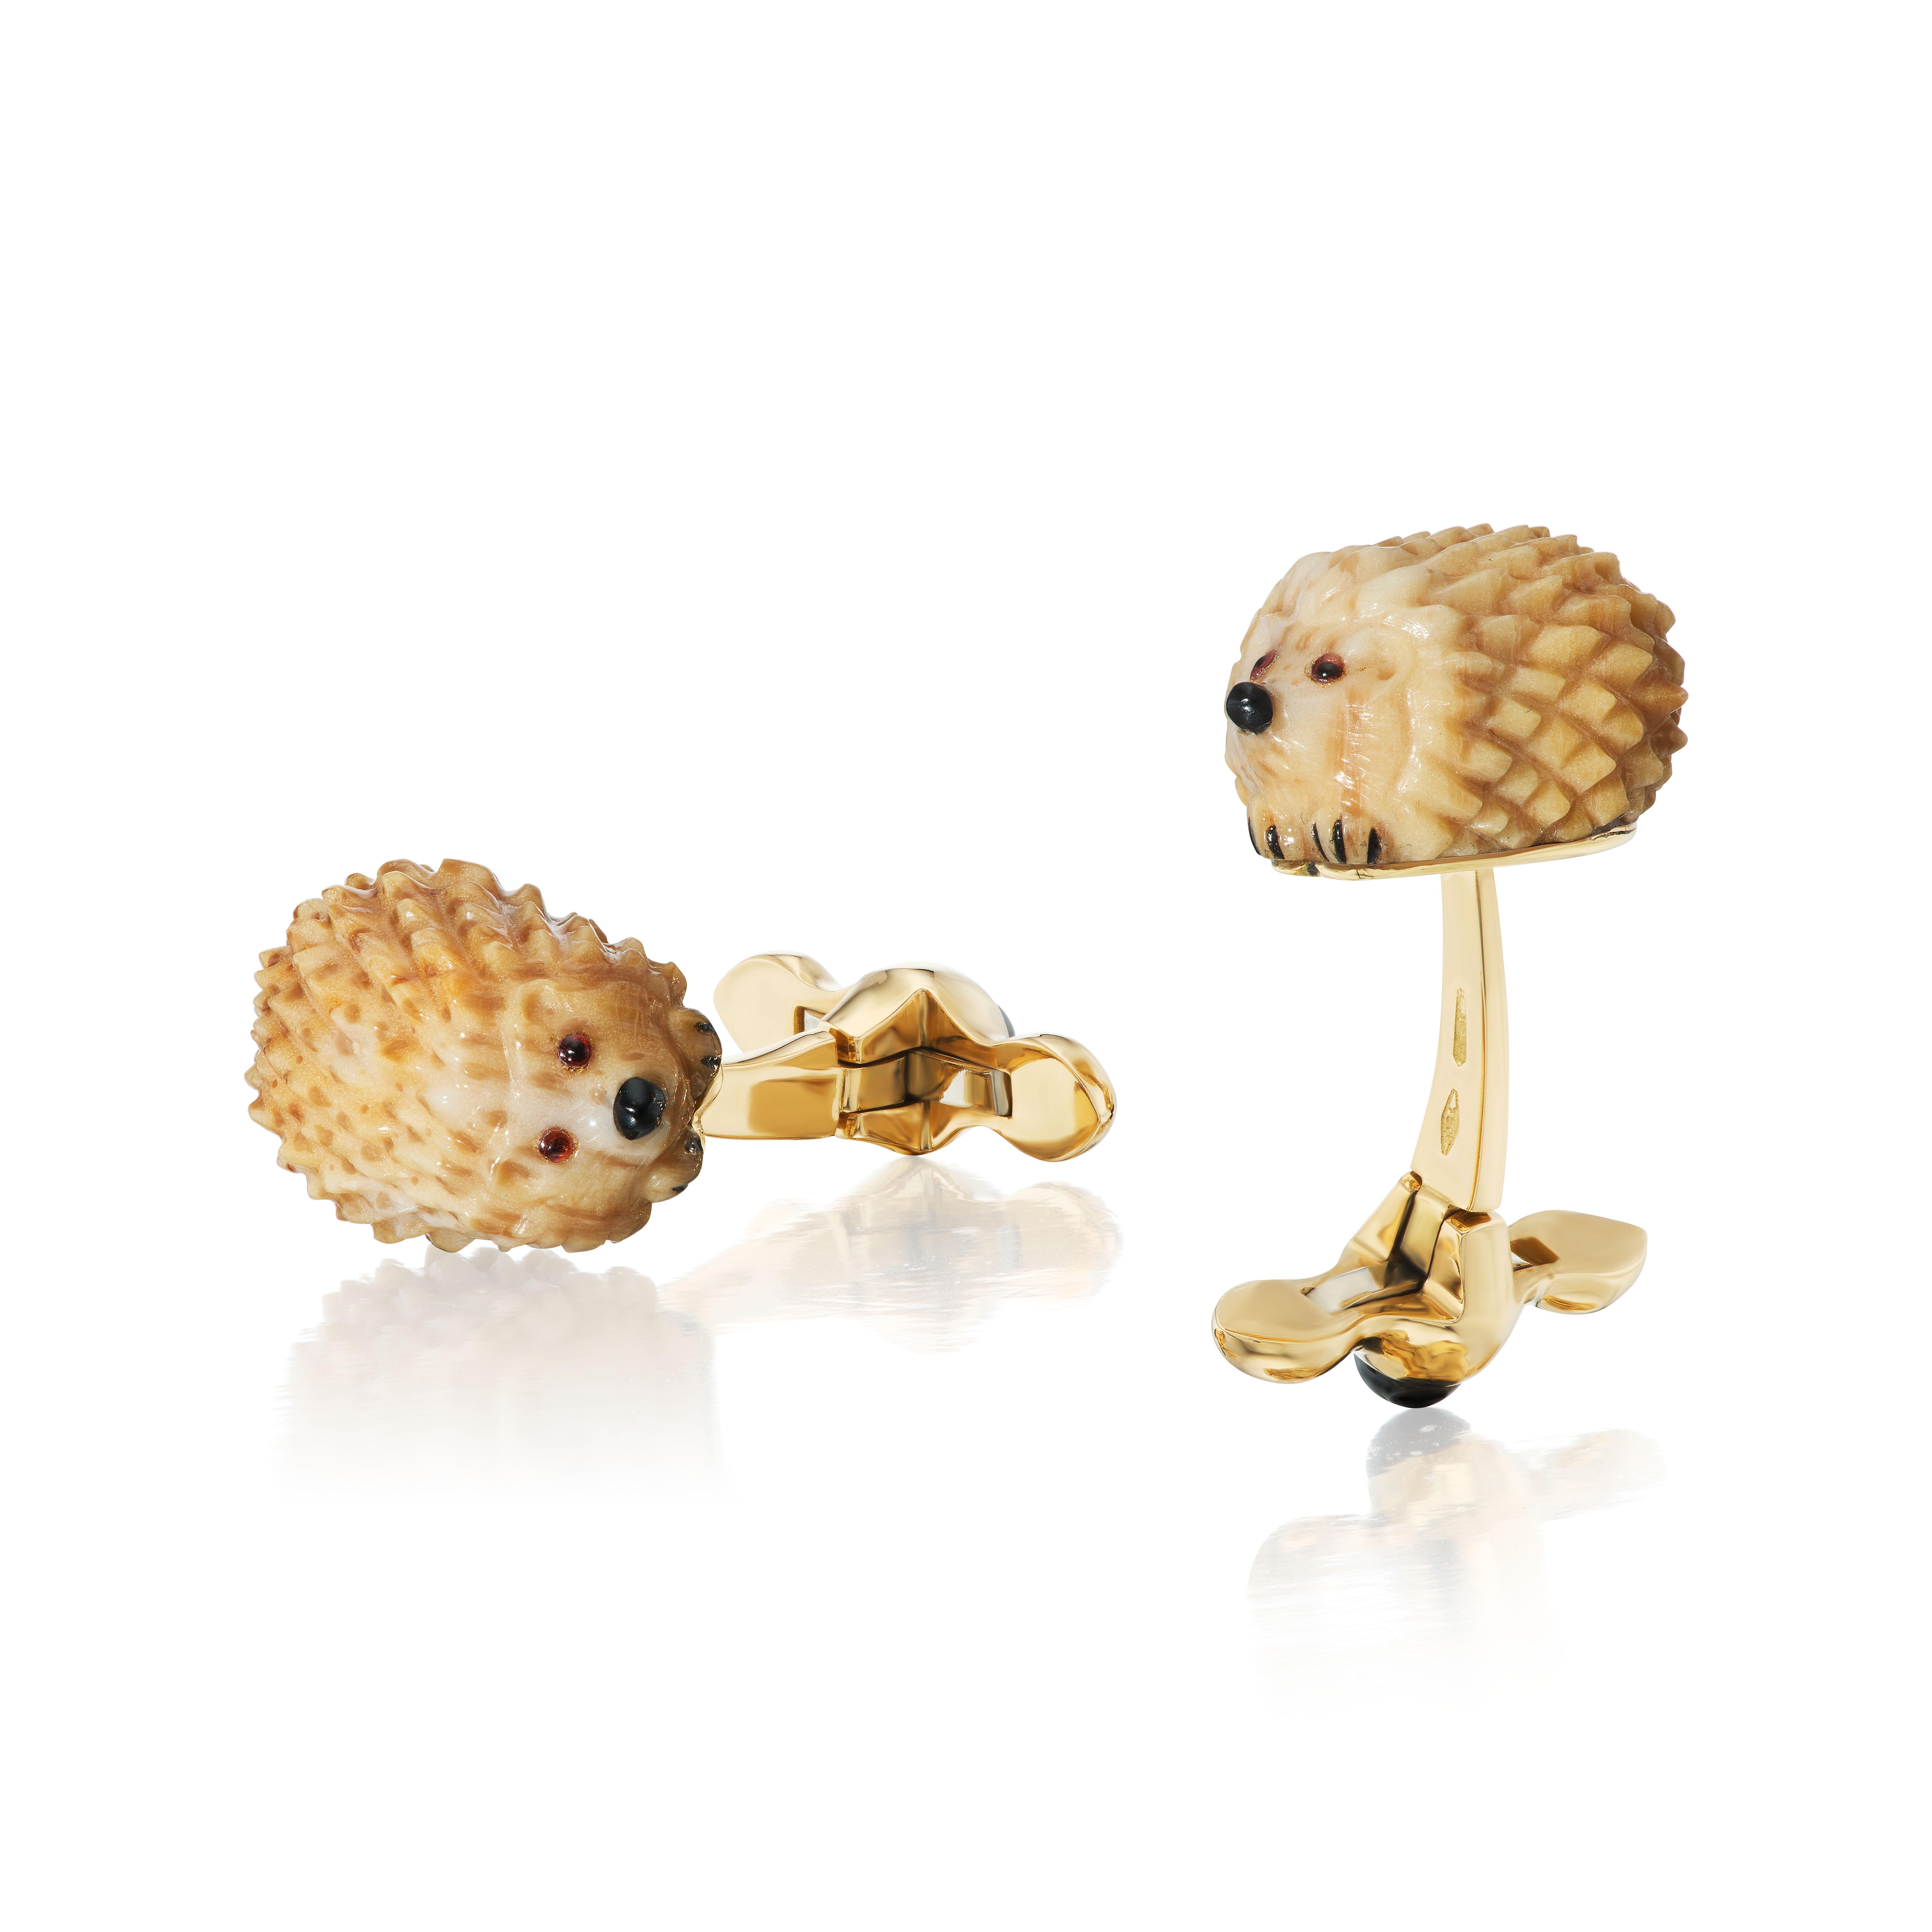 These hedgehogs are carved from a unique piece of fossilized palm tree, so each pair is always one of a kind.  The eyes are made from rock crystal with a touch of enamel behind them and the noses are carved from onyx.  Further details are in black